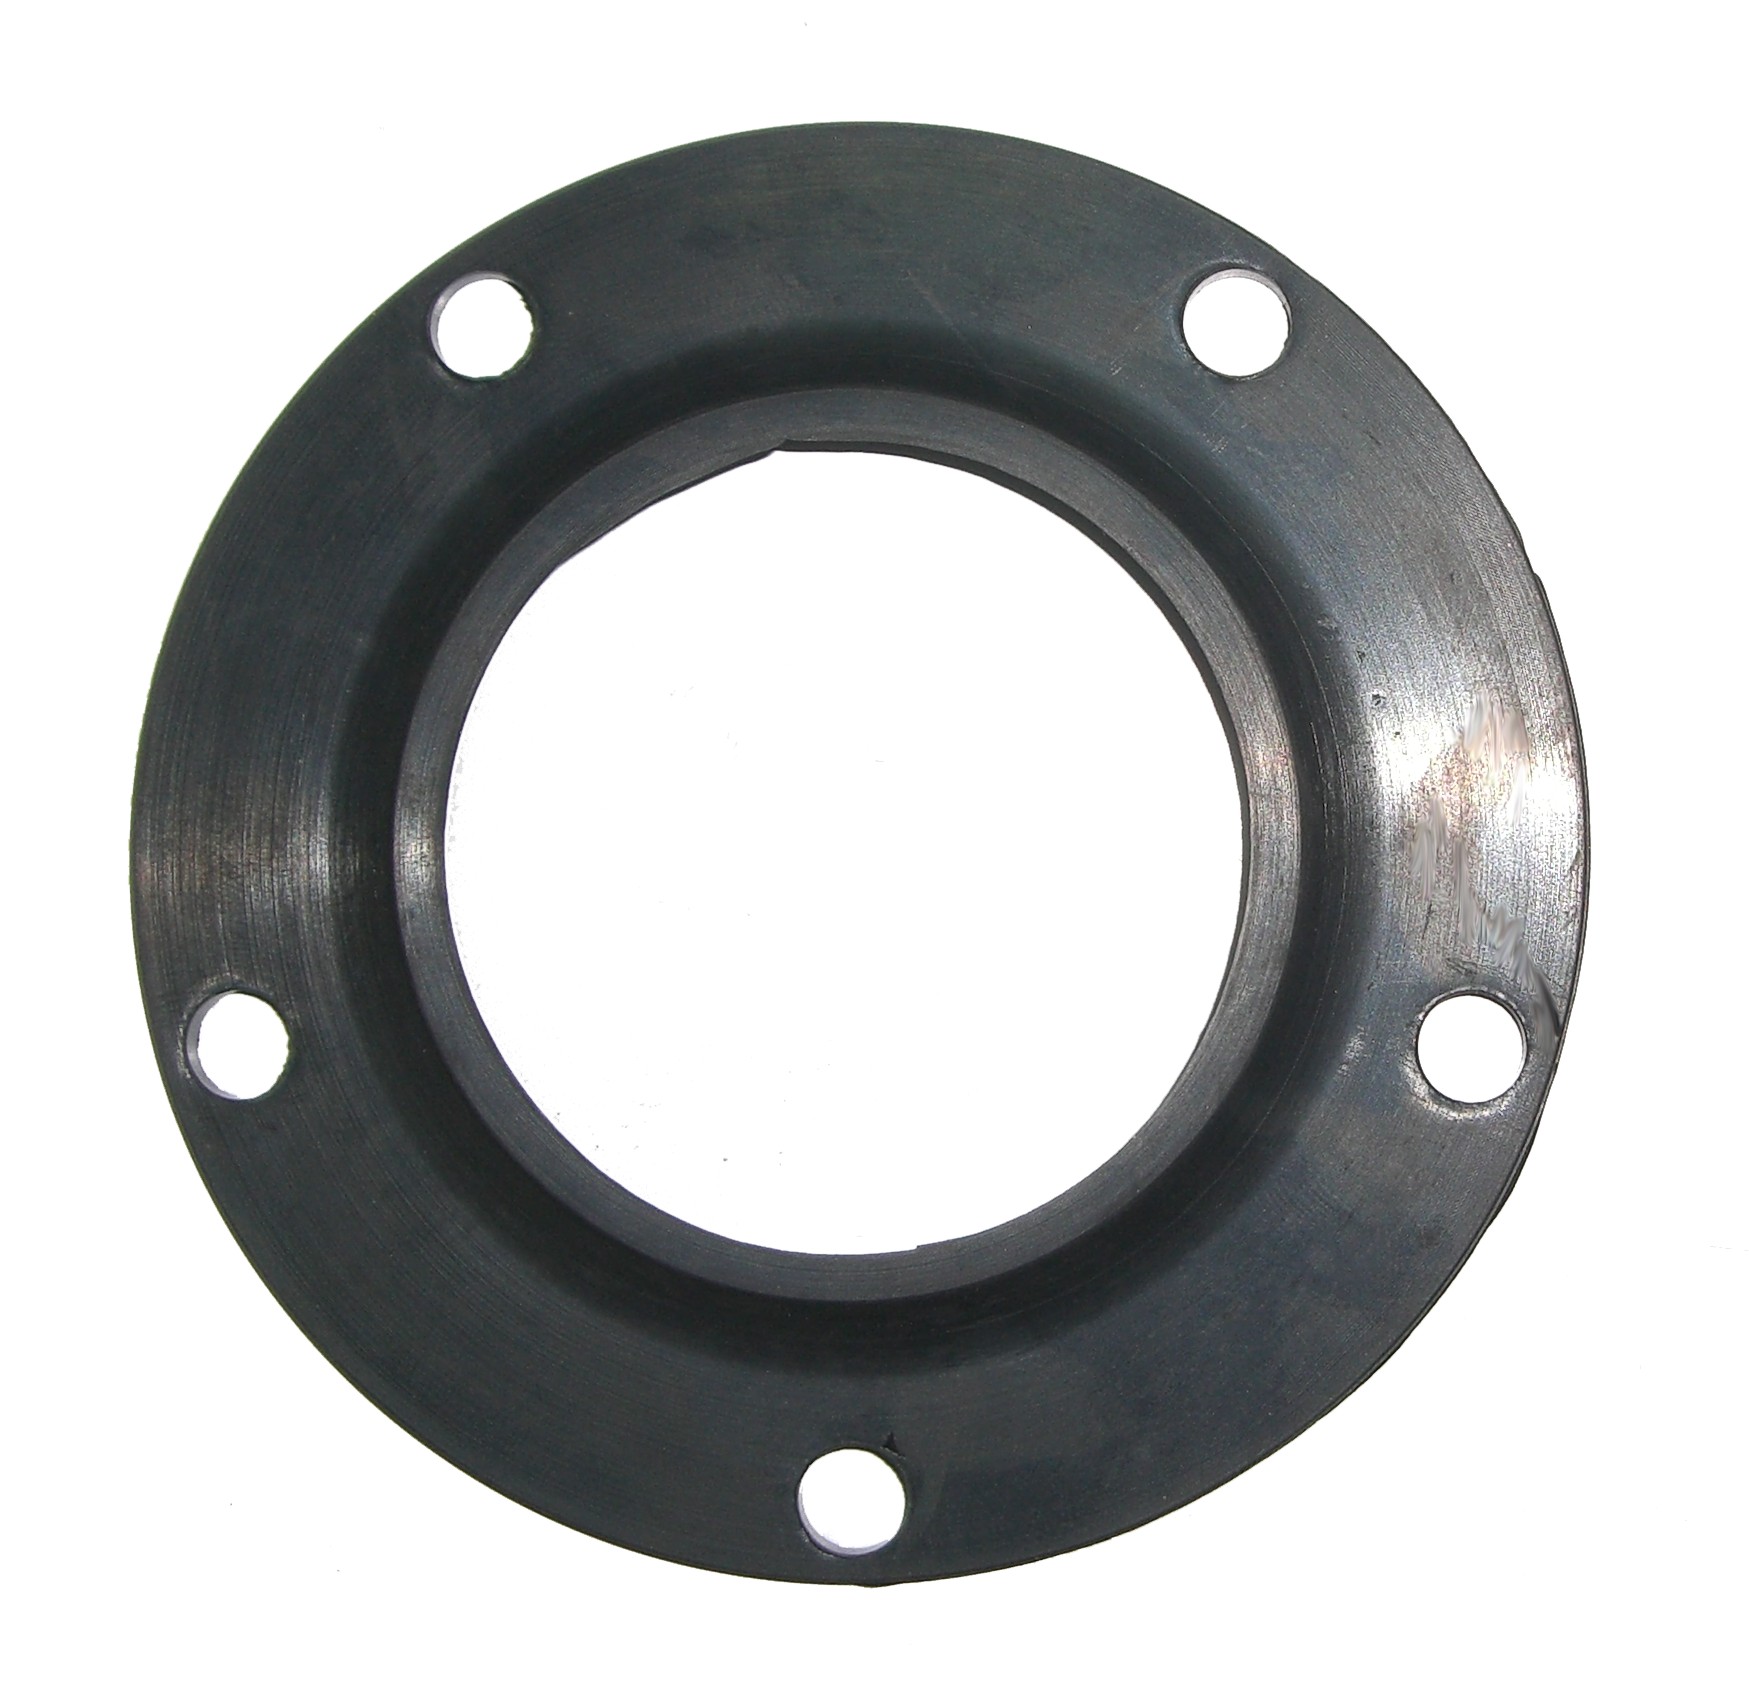 Rubber Flange Φ120 with 5 holes